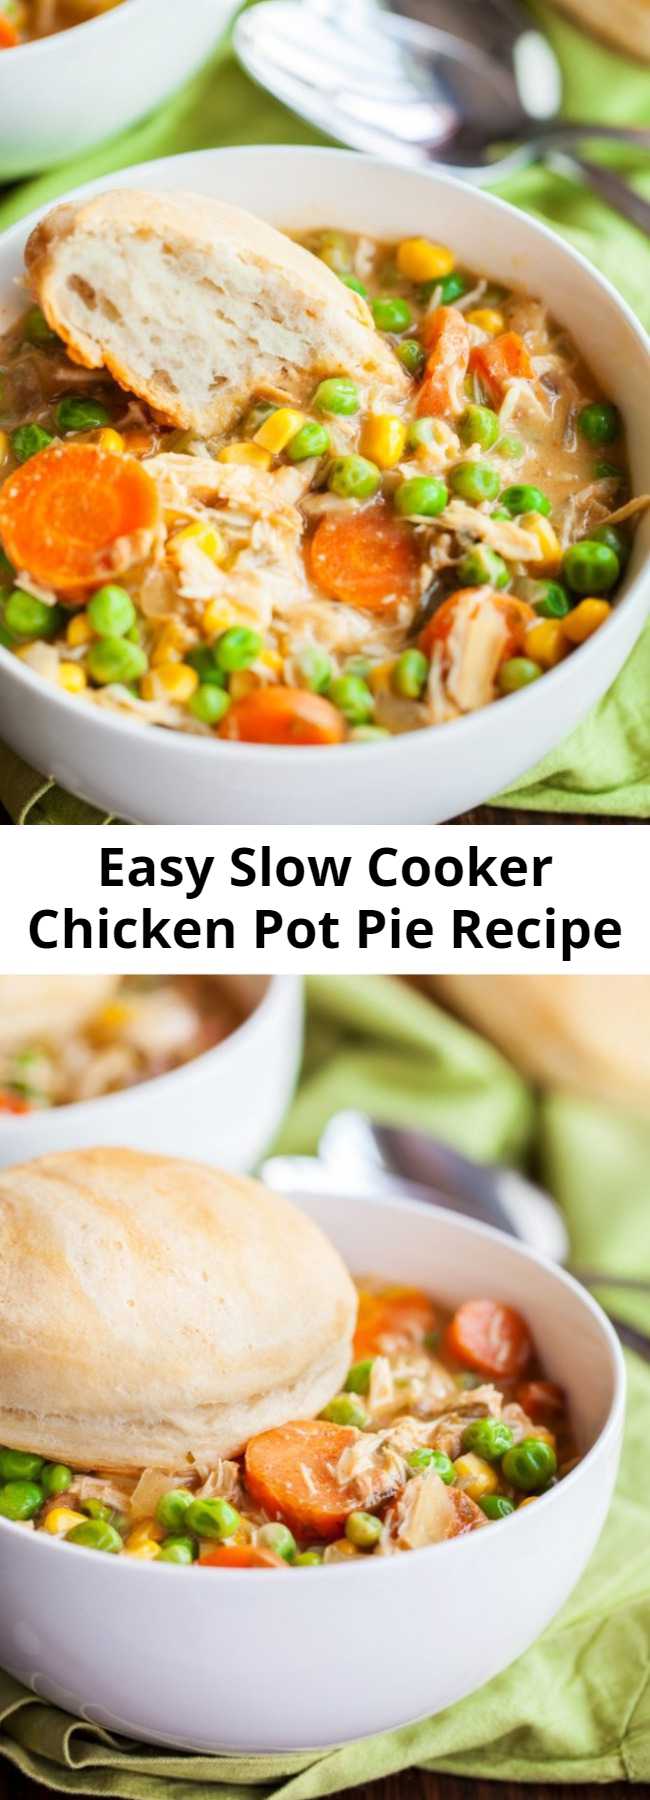 Easy Slow Cooker Chicken Pot Pie Recipe - Create a delicious mouth-watering Slow Cooker Chicken Pot Pie! This recipe is ridiculously easy, jam-packed with flavor, and one of my families favorite dishes. The seasoned pulled chicken and fresh cut veggies marinated in spices all day creating an amazing dinner you will be proud to serve up!